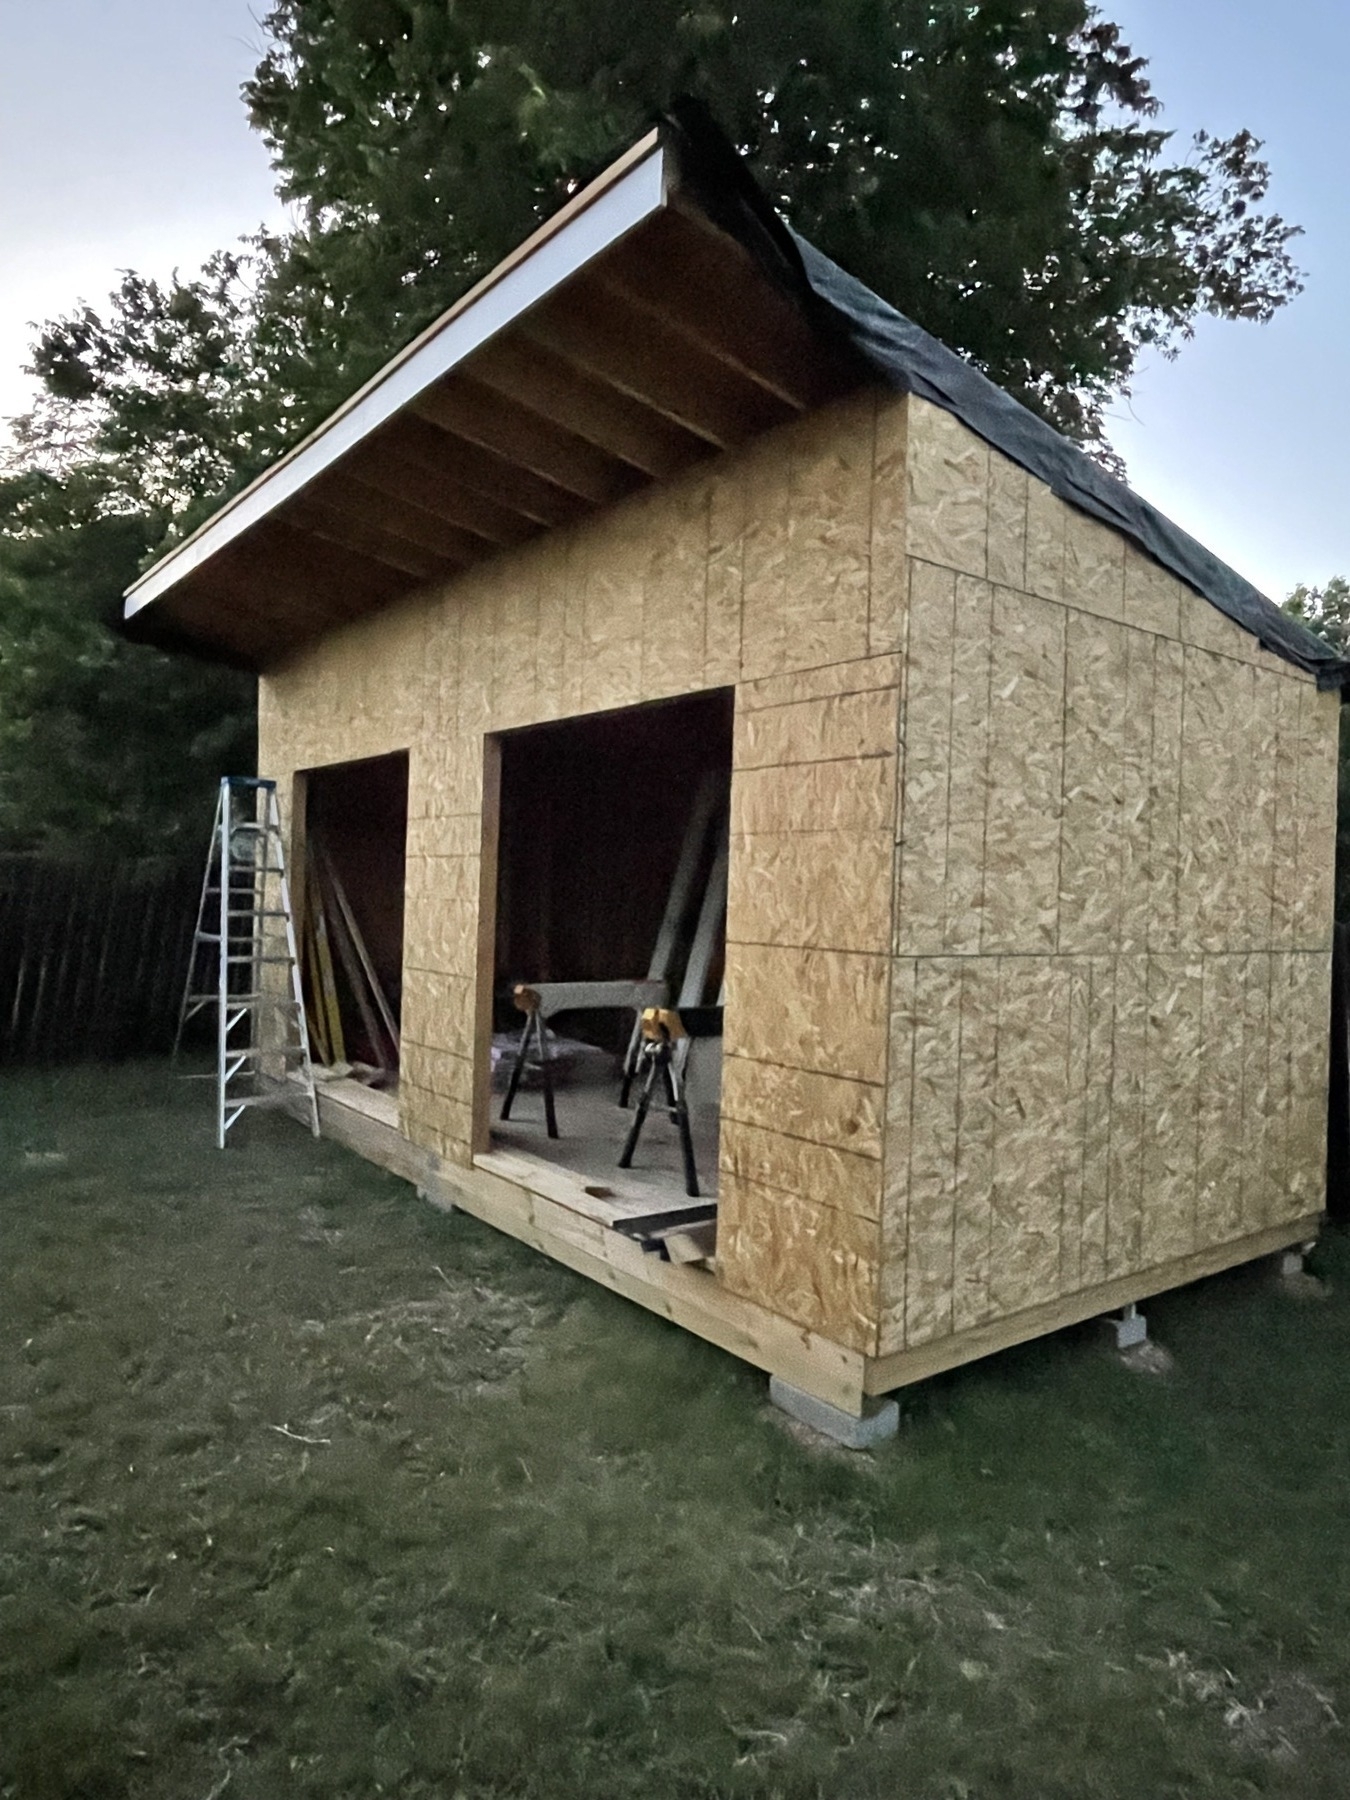 In progress photo of the shed